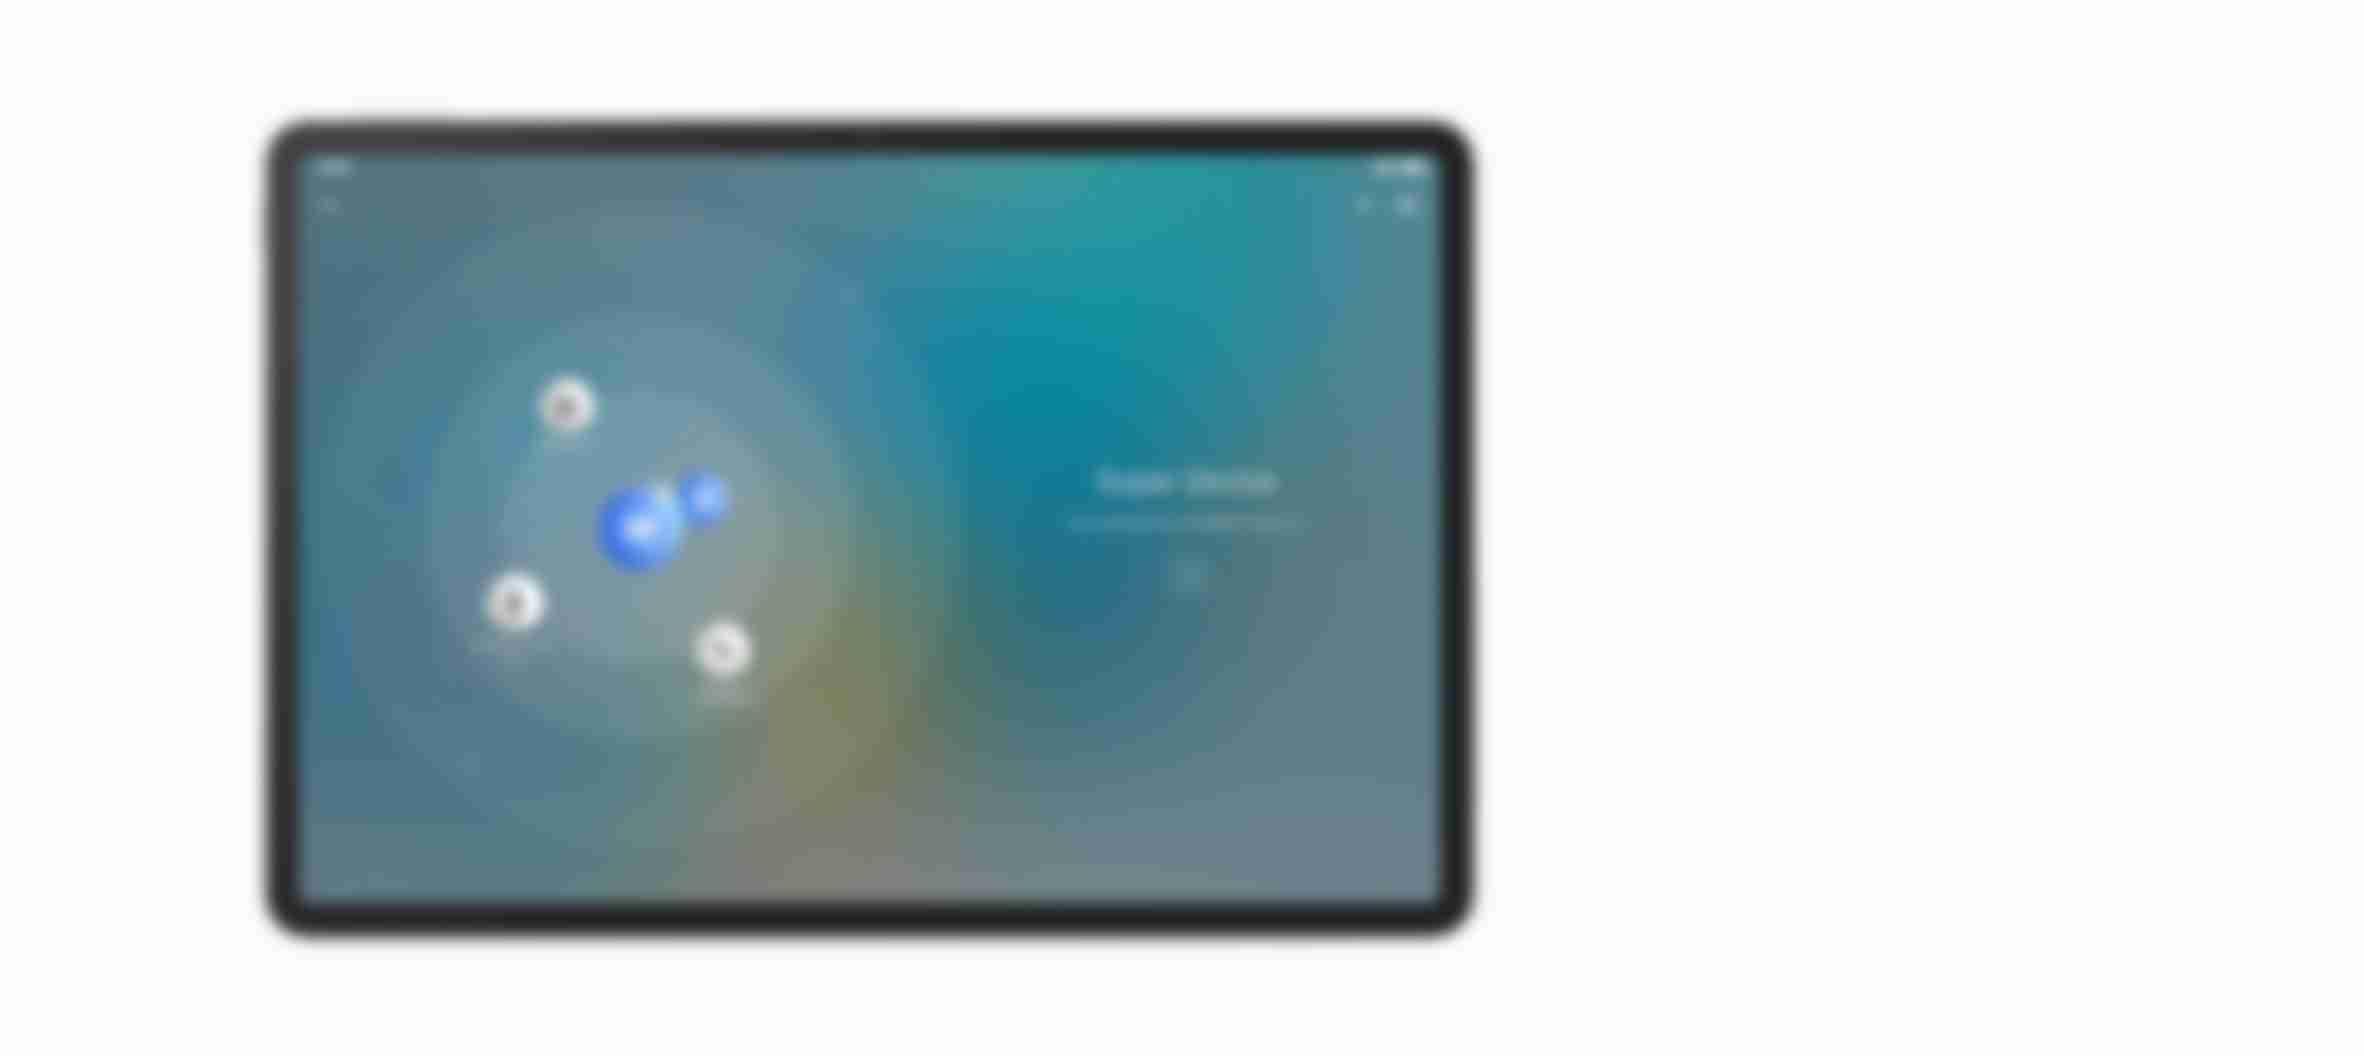 HUAWEI MatePad 11.5-inch Top Features